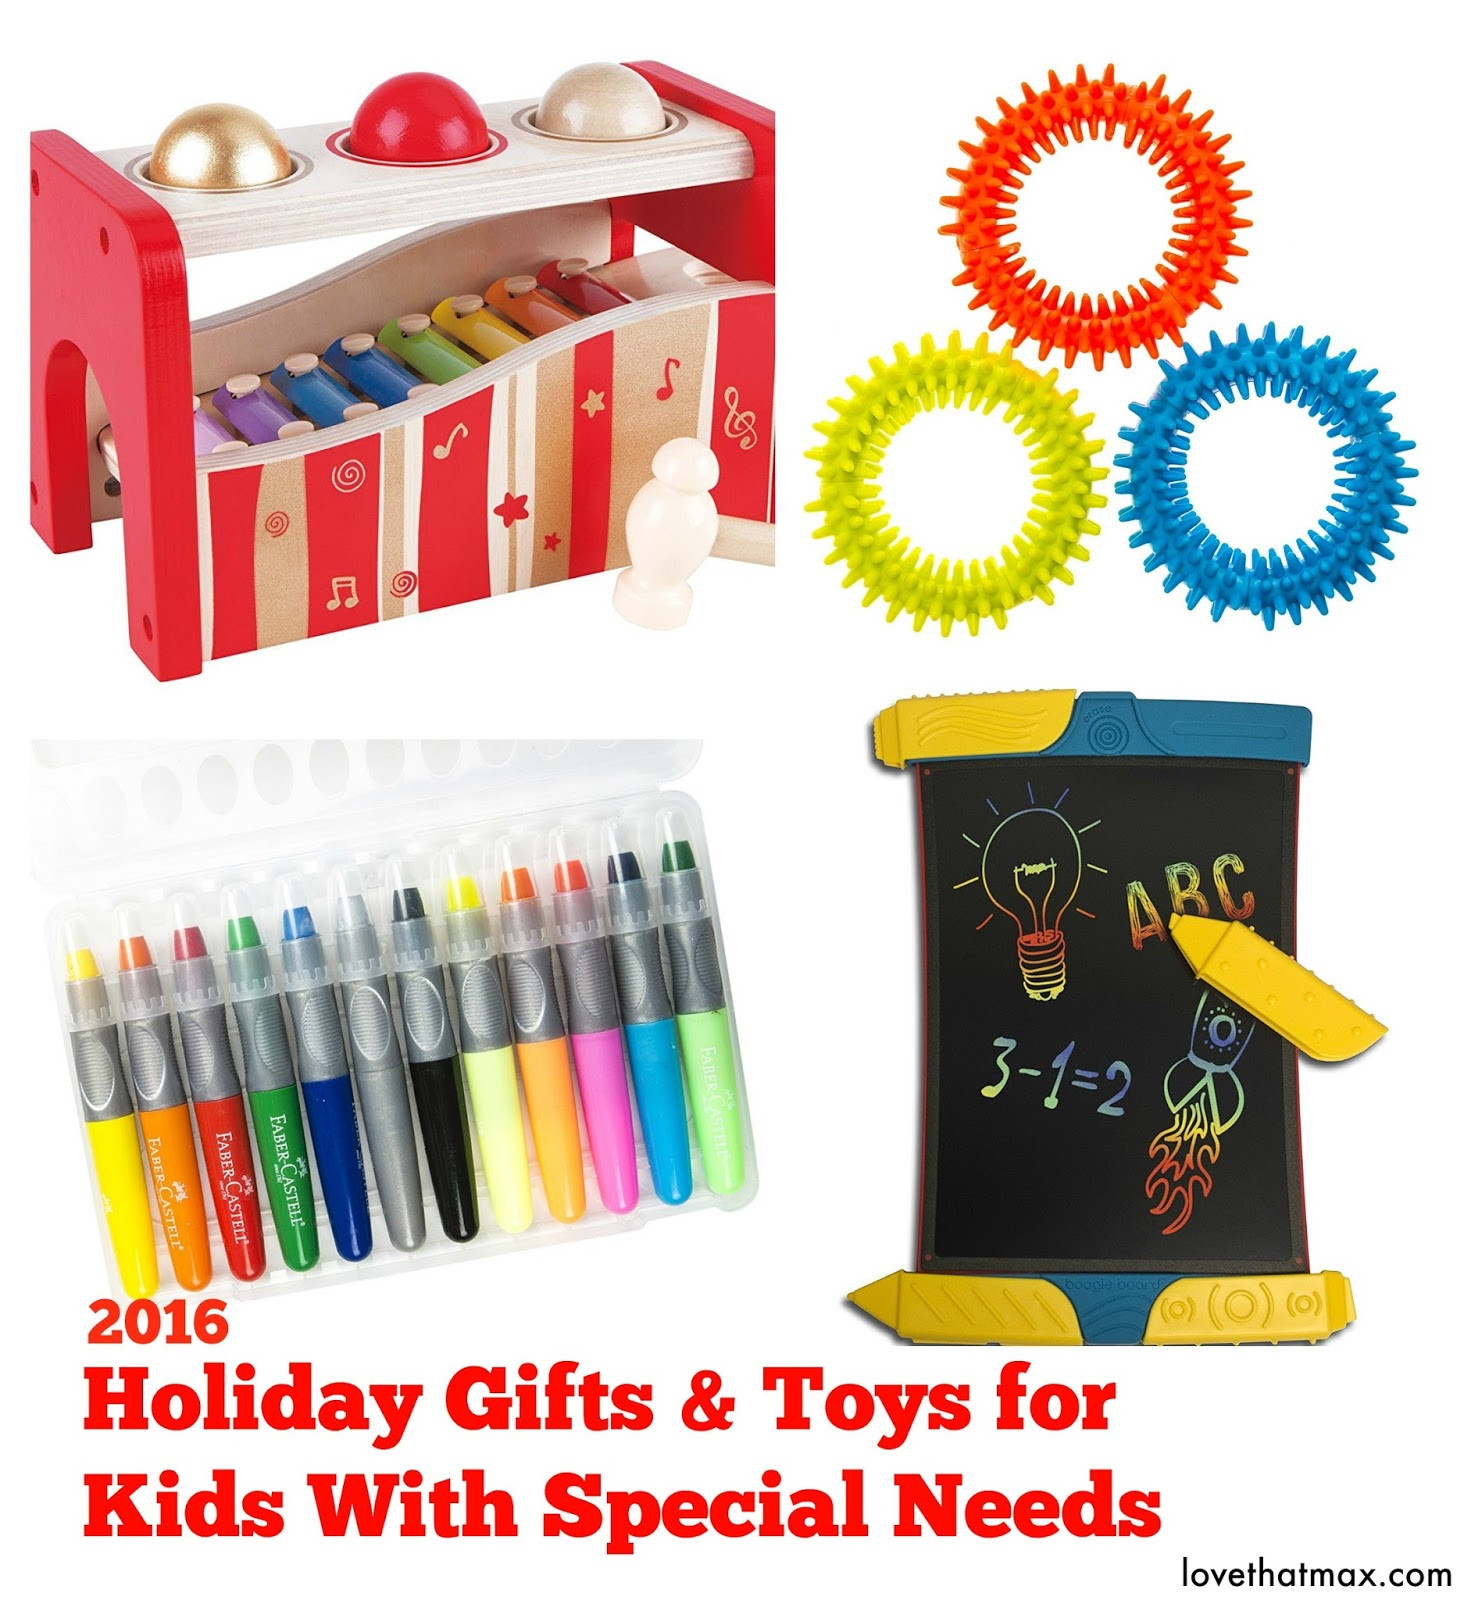 Gifts For Special Needs Children
 Love That Max Holiday ts and toys for kids with